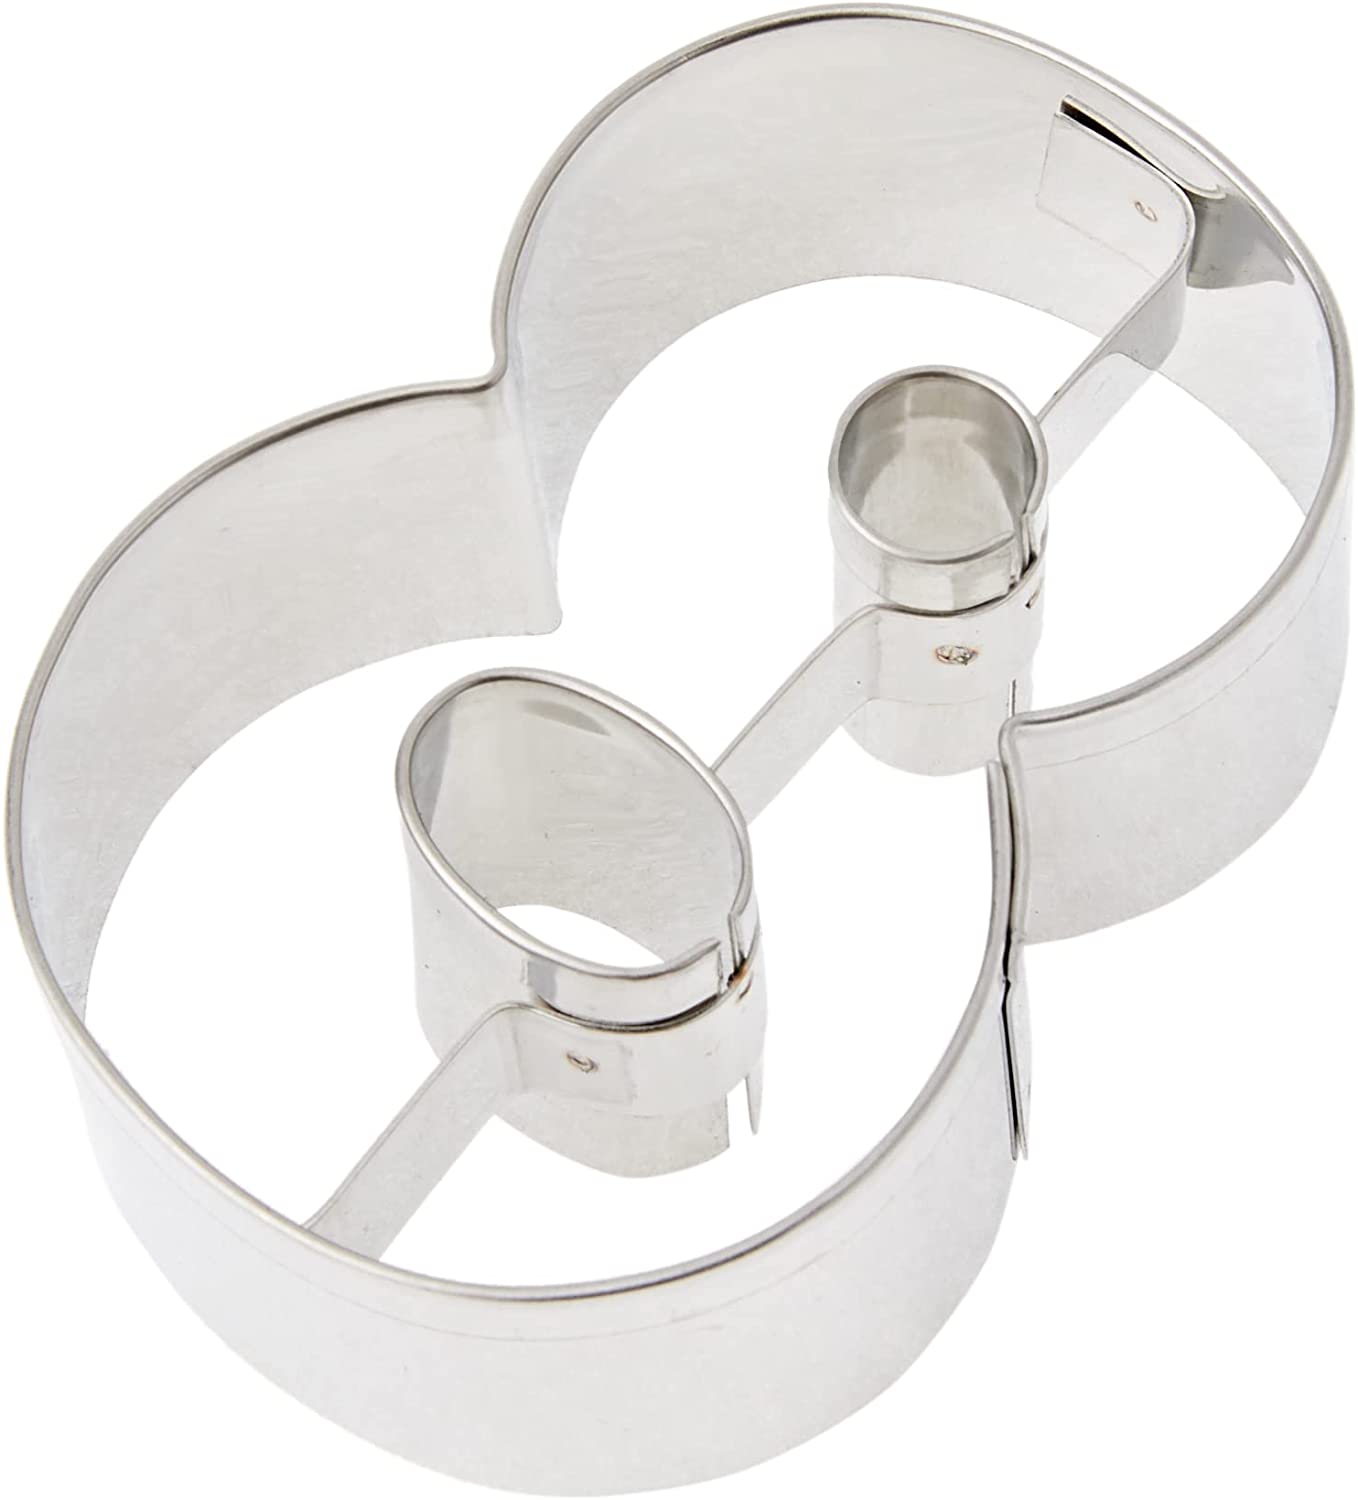 Staedter Cookie Cutter Number 8, Stainless Steel, 6.5 Cm